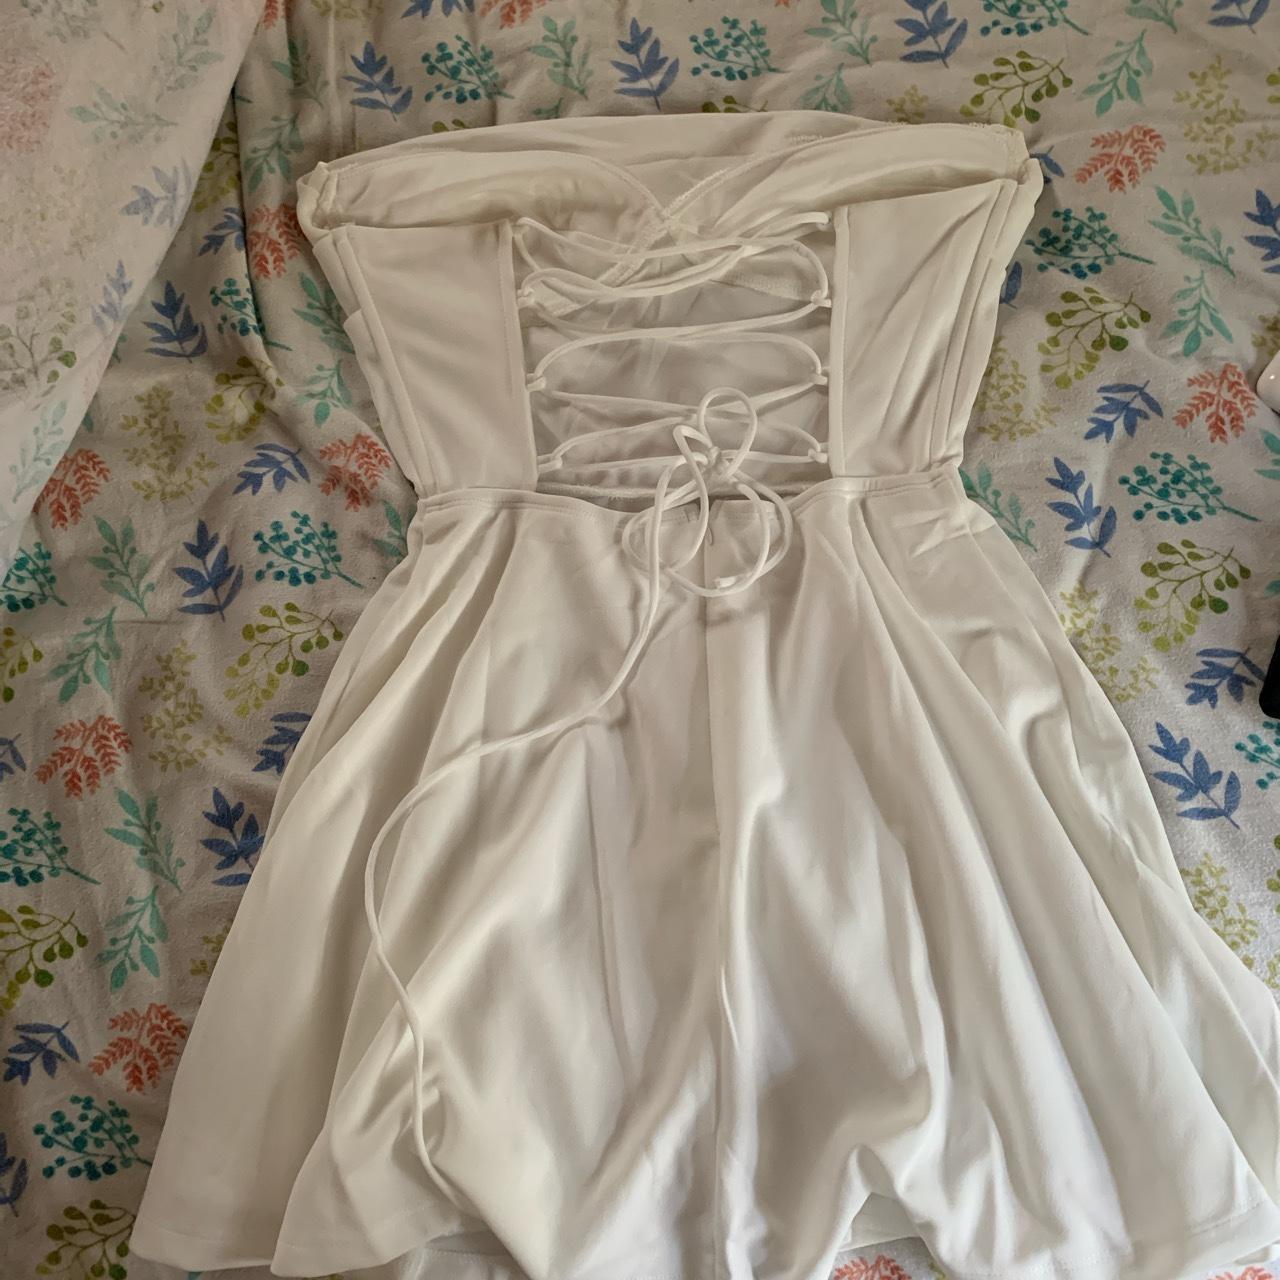 White Lucy in the sky strapless dress - Depop